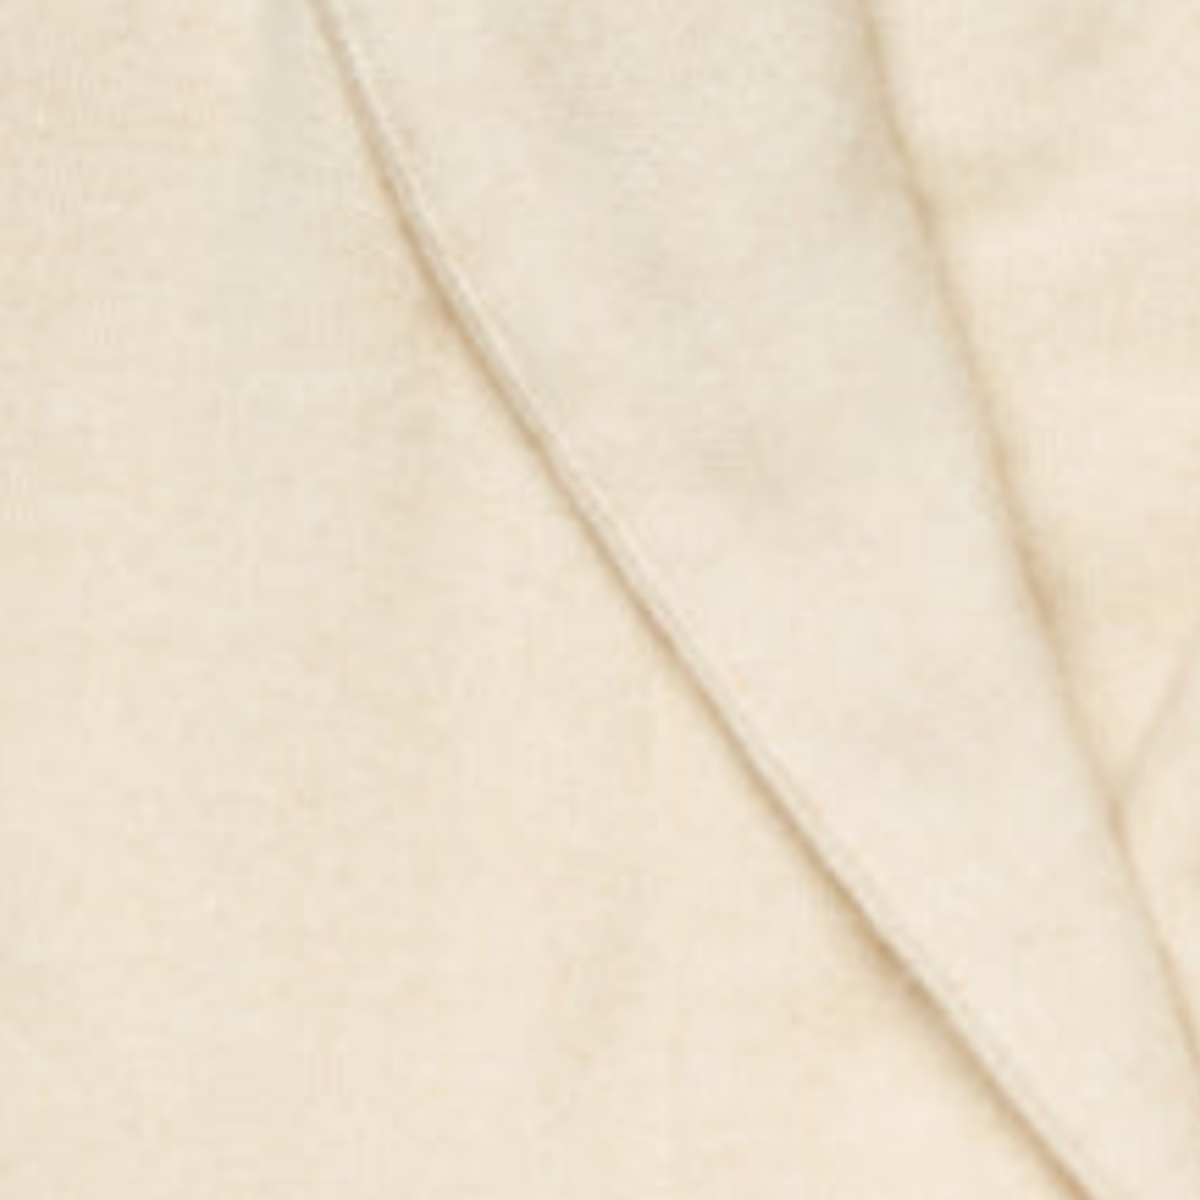 Swatch Sample of Sferra Sardinia’s Cashmere Robes in Ivory Color